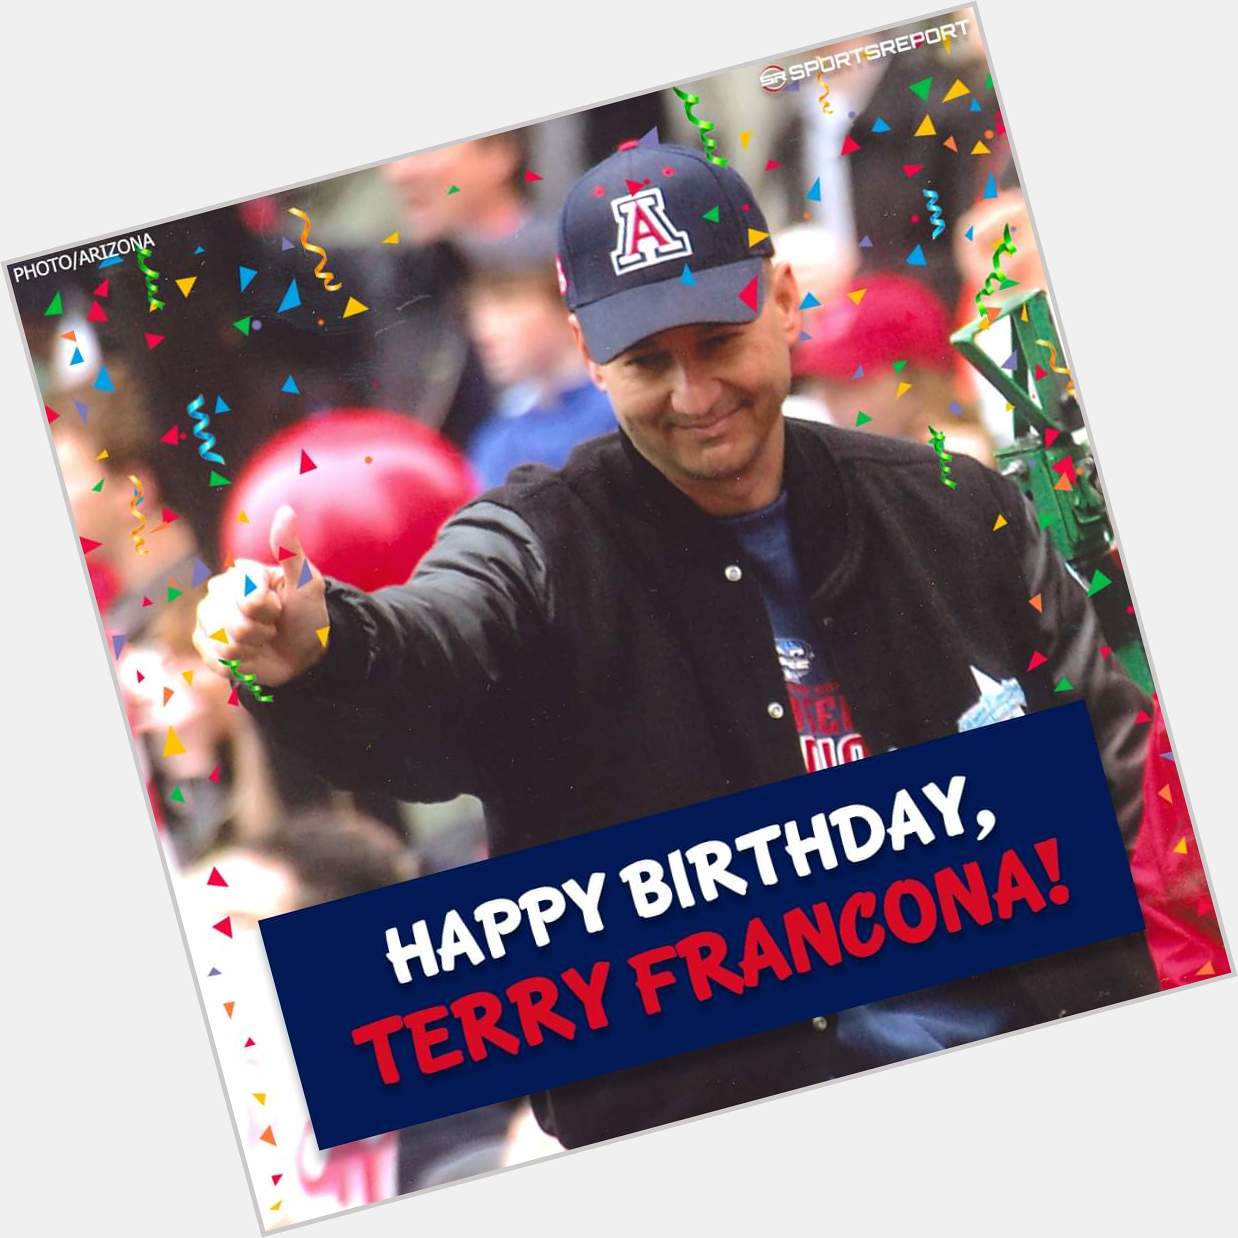 Wishing A Happy Birthday To Arizona Wildcats & Current Cleveland Manager Terry Francona! 